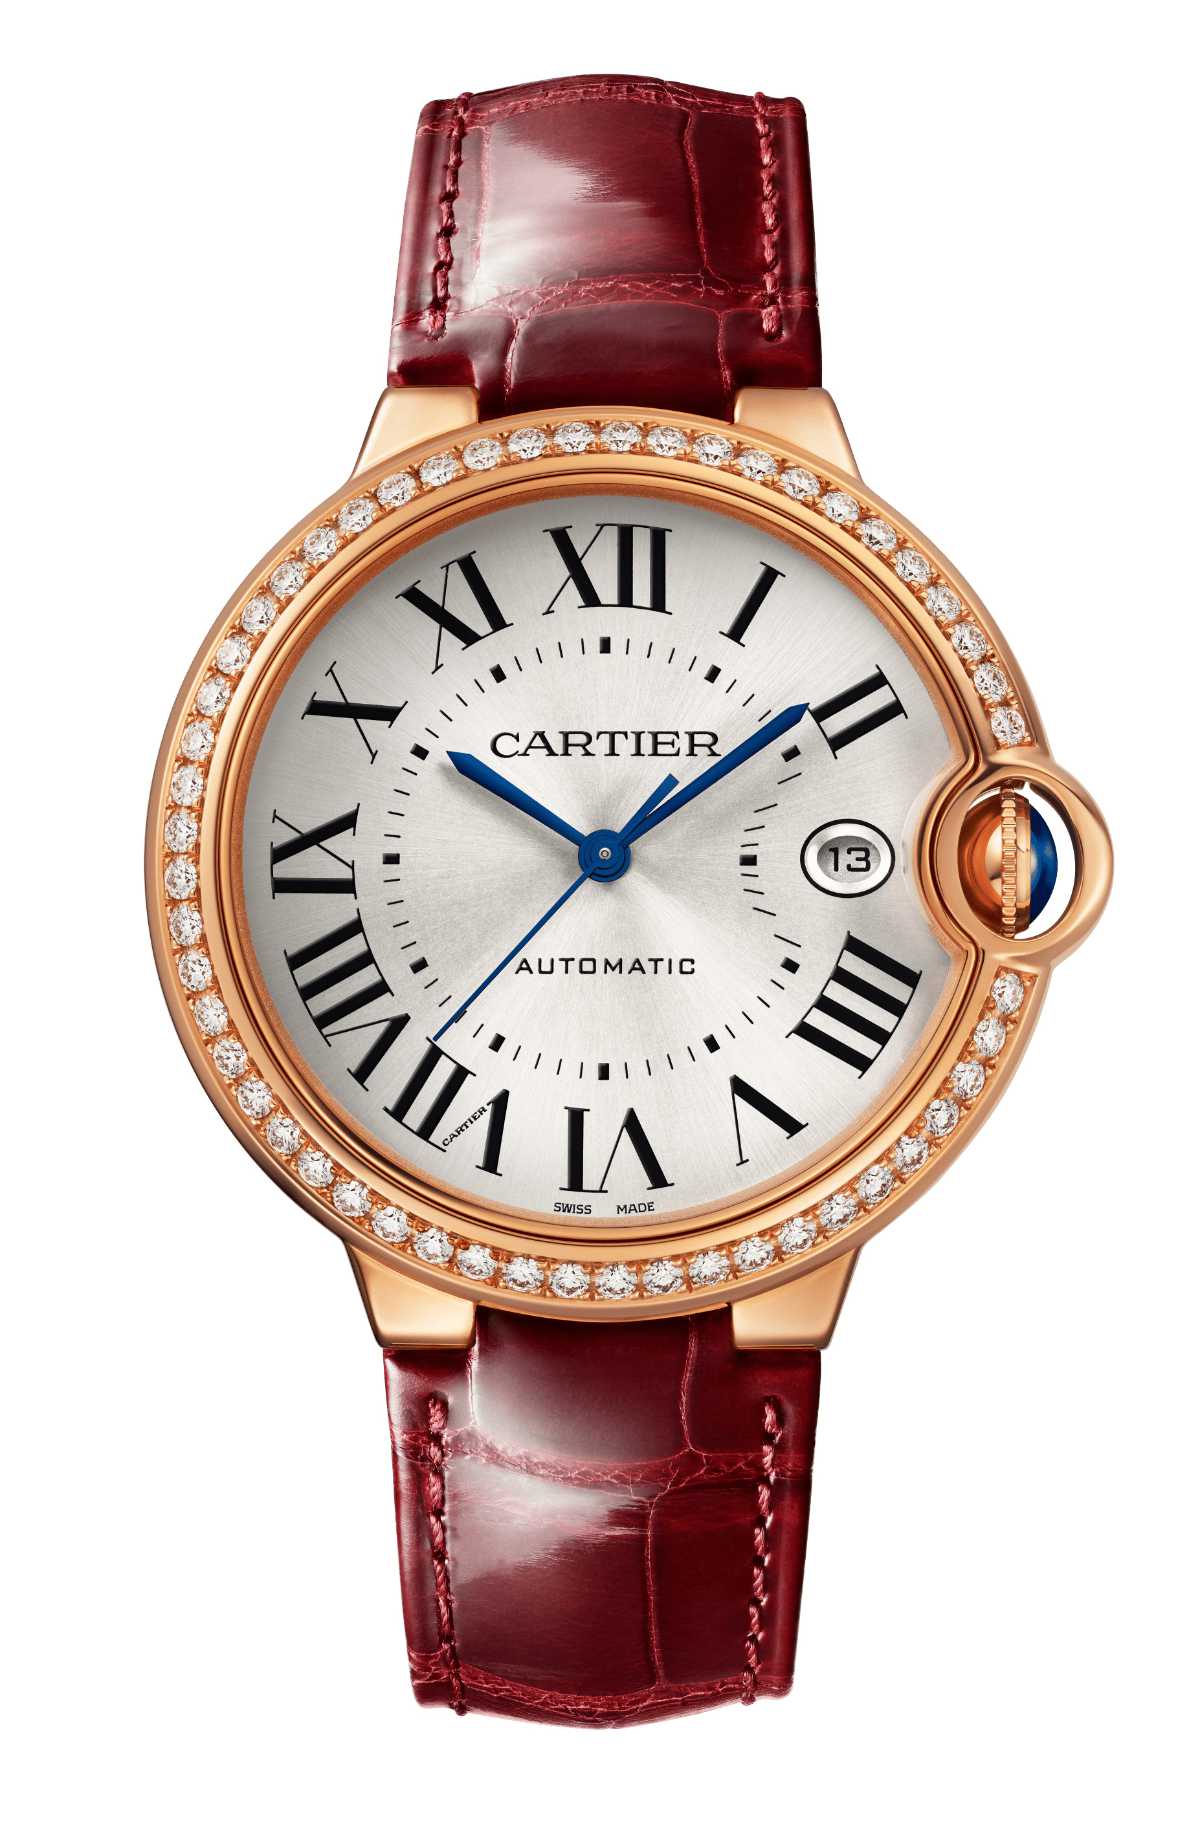 Mother's day gift inspiration presented by Cartier